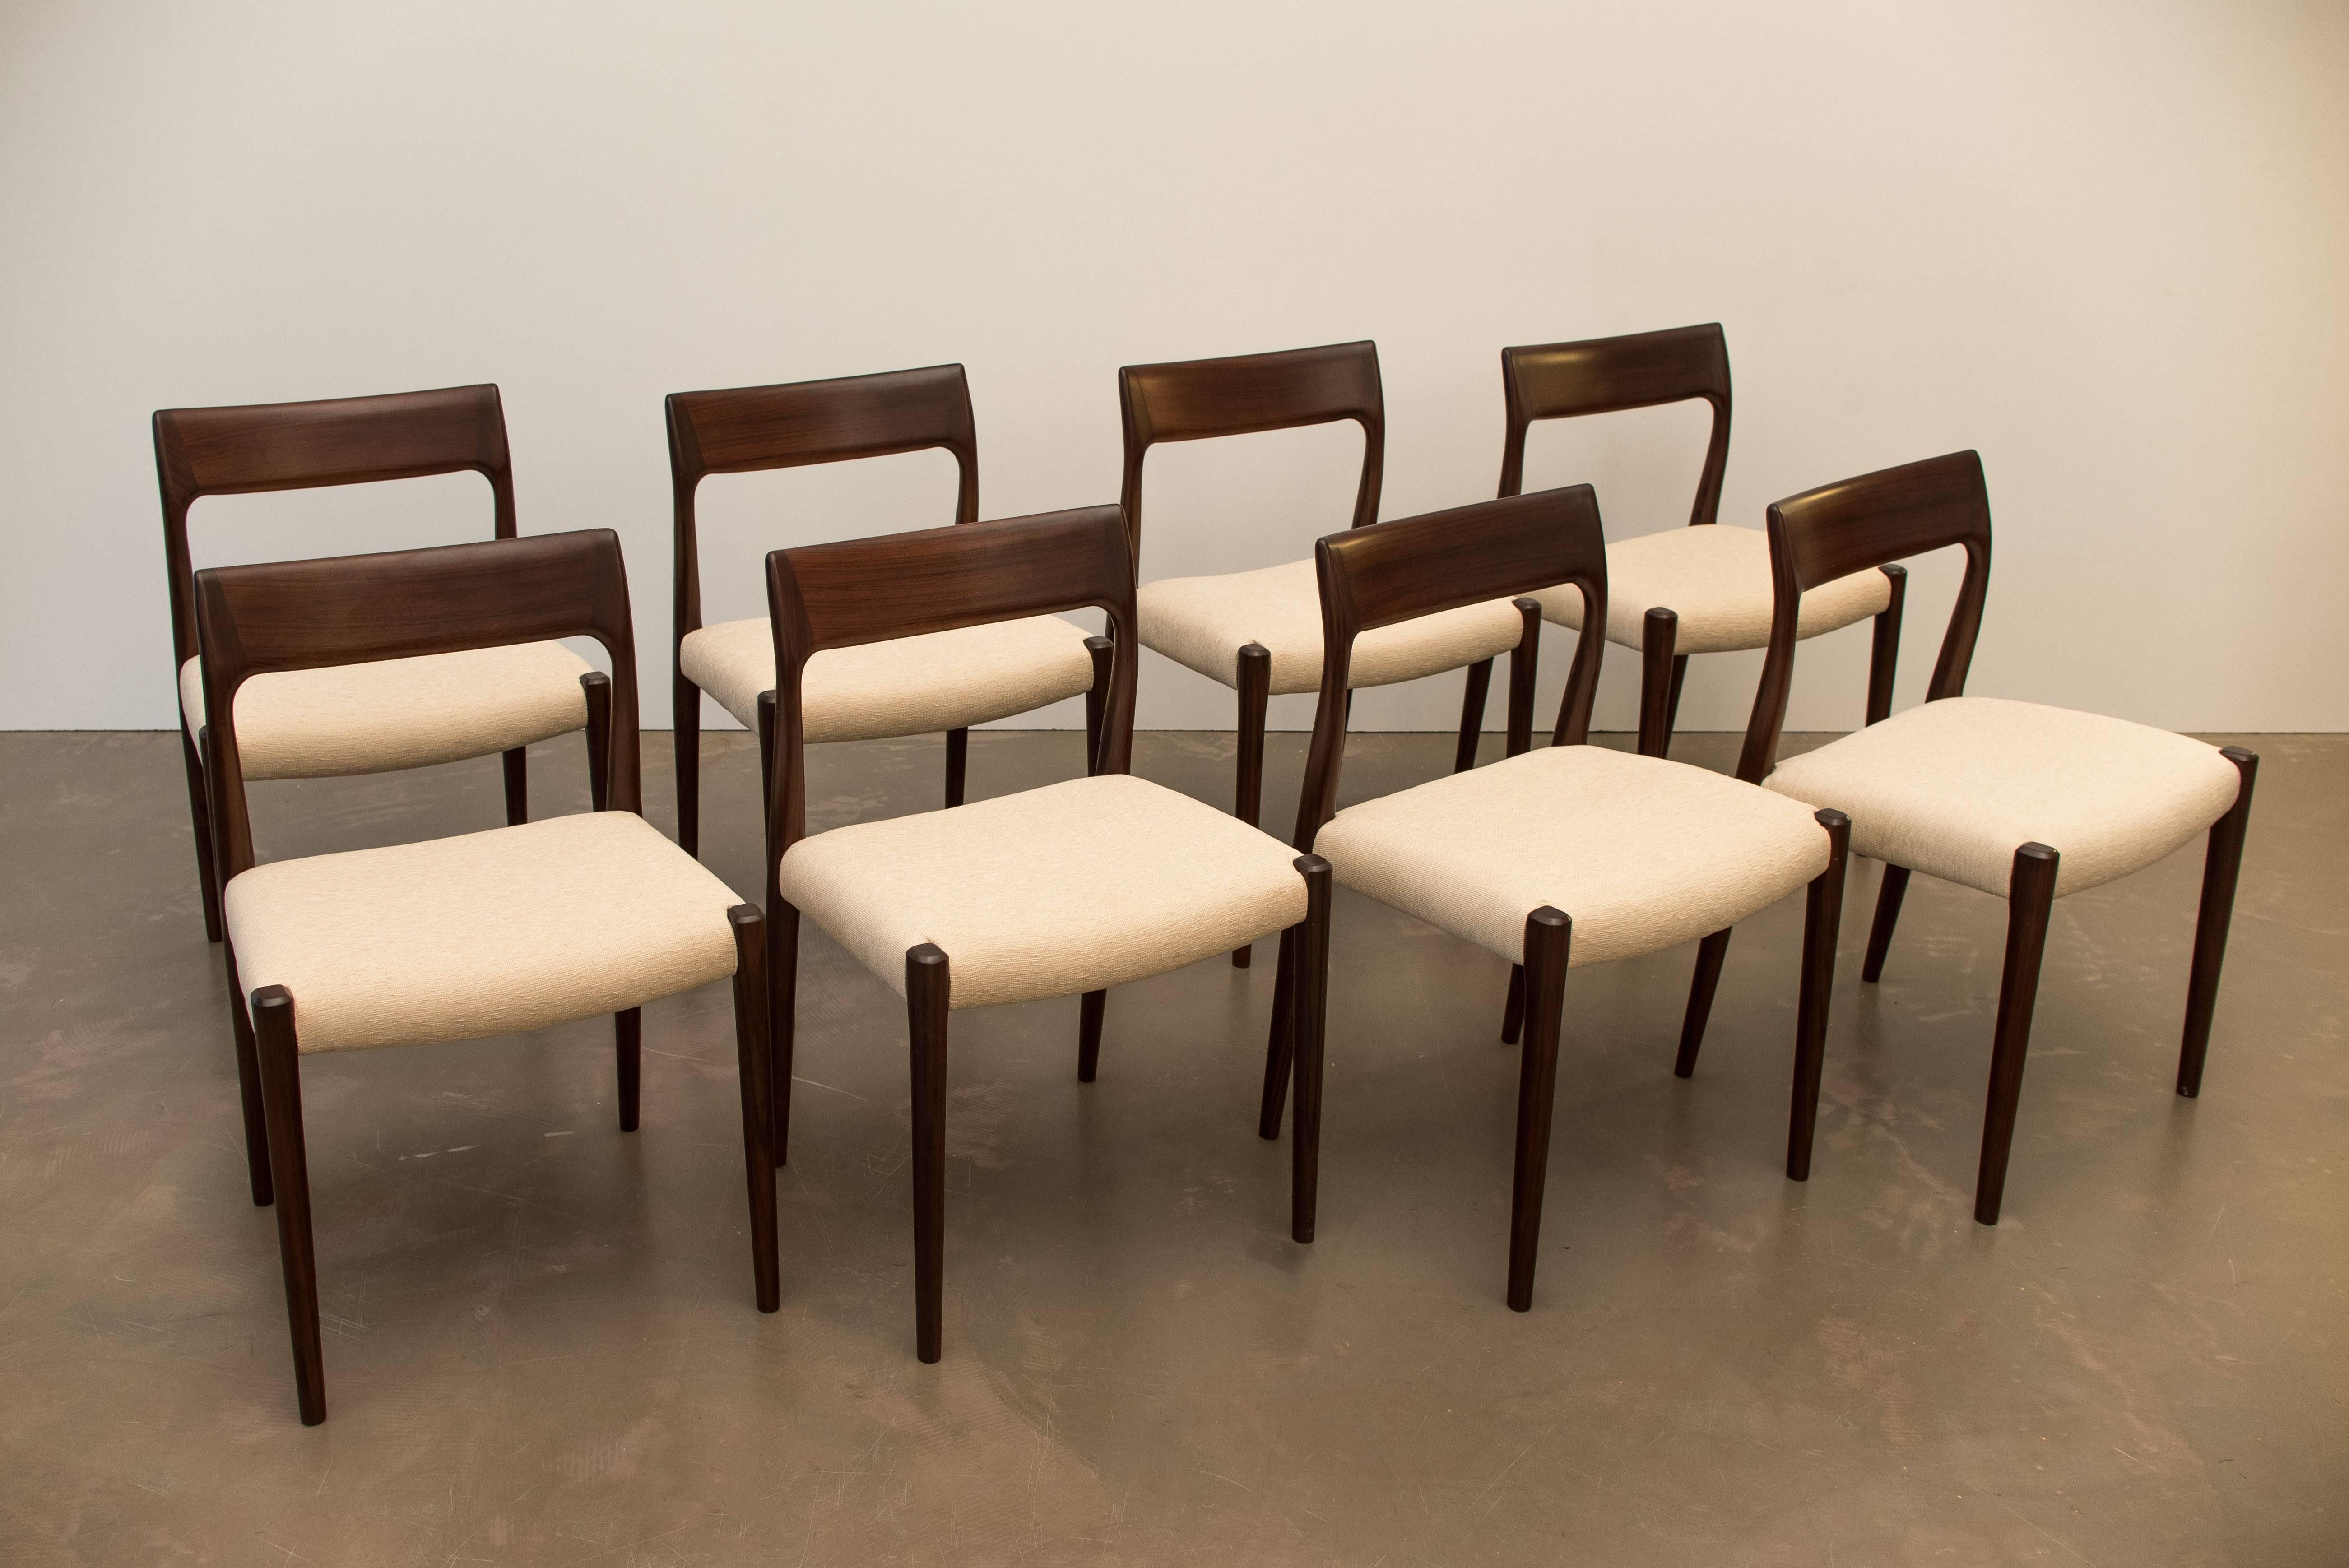 Set of eight dining chairs, designed by Nils Moller and manufactured by J.L. Møllers Møbelfabrik in the 1960s. The frames are made from solid rosewood wood and have new fabric upholstery.